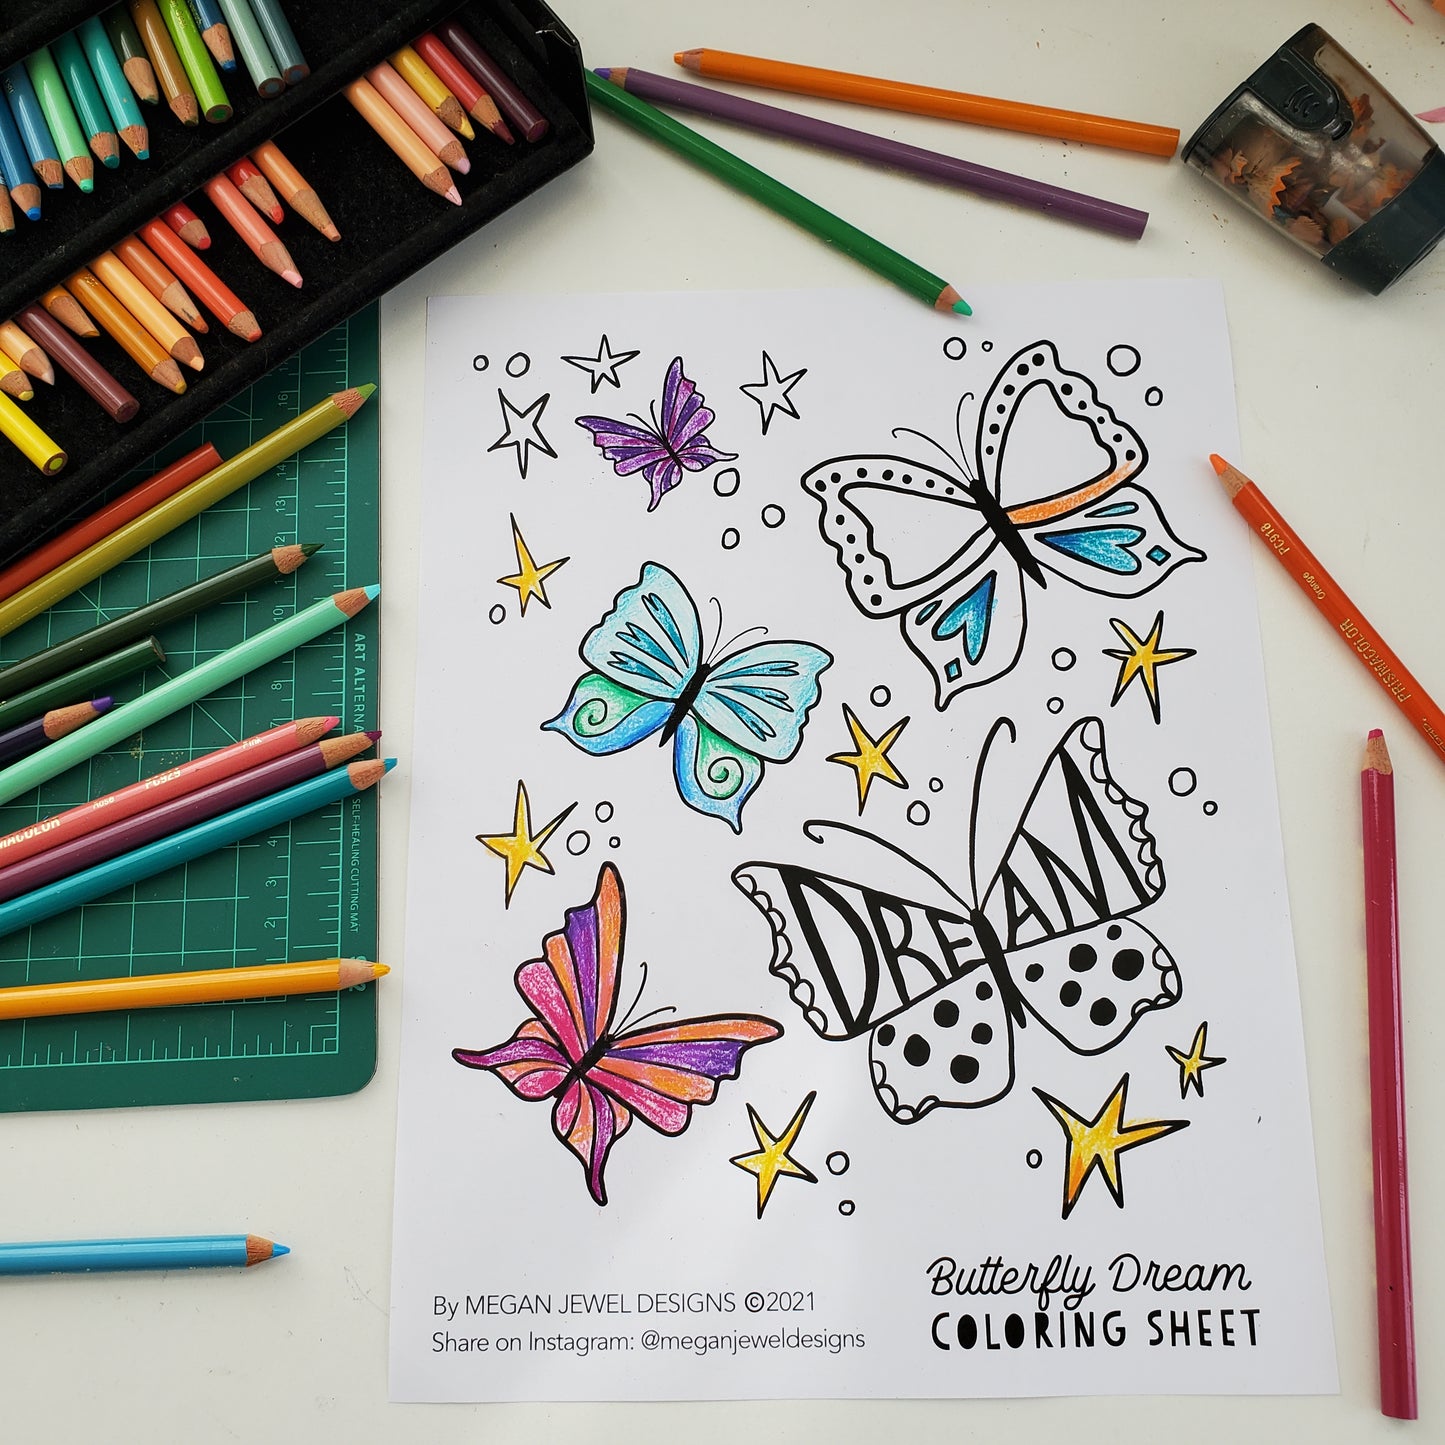 FREE Coloring Sheets! from Megan Jewel Designs